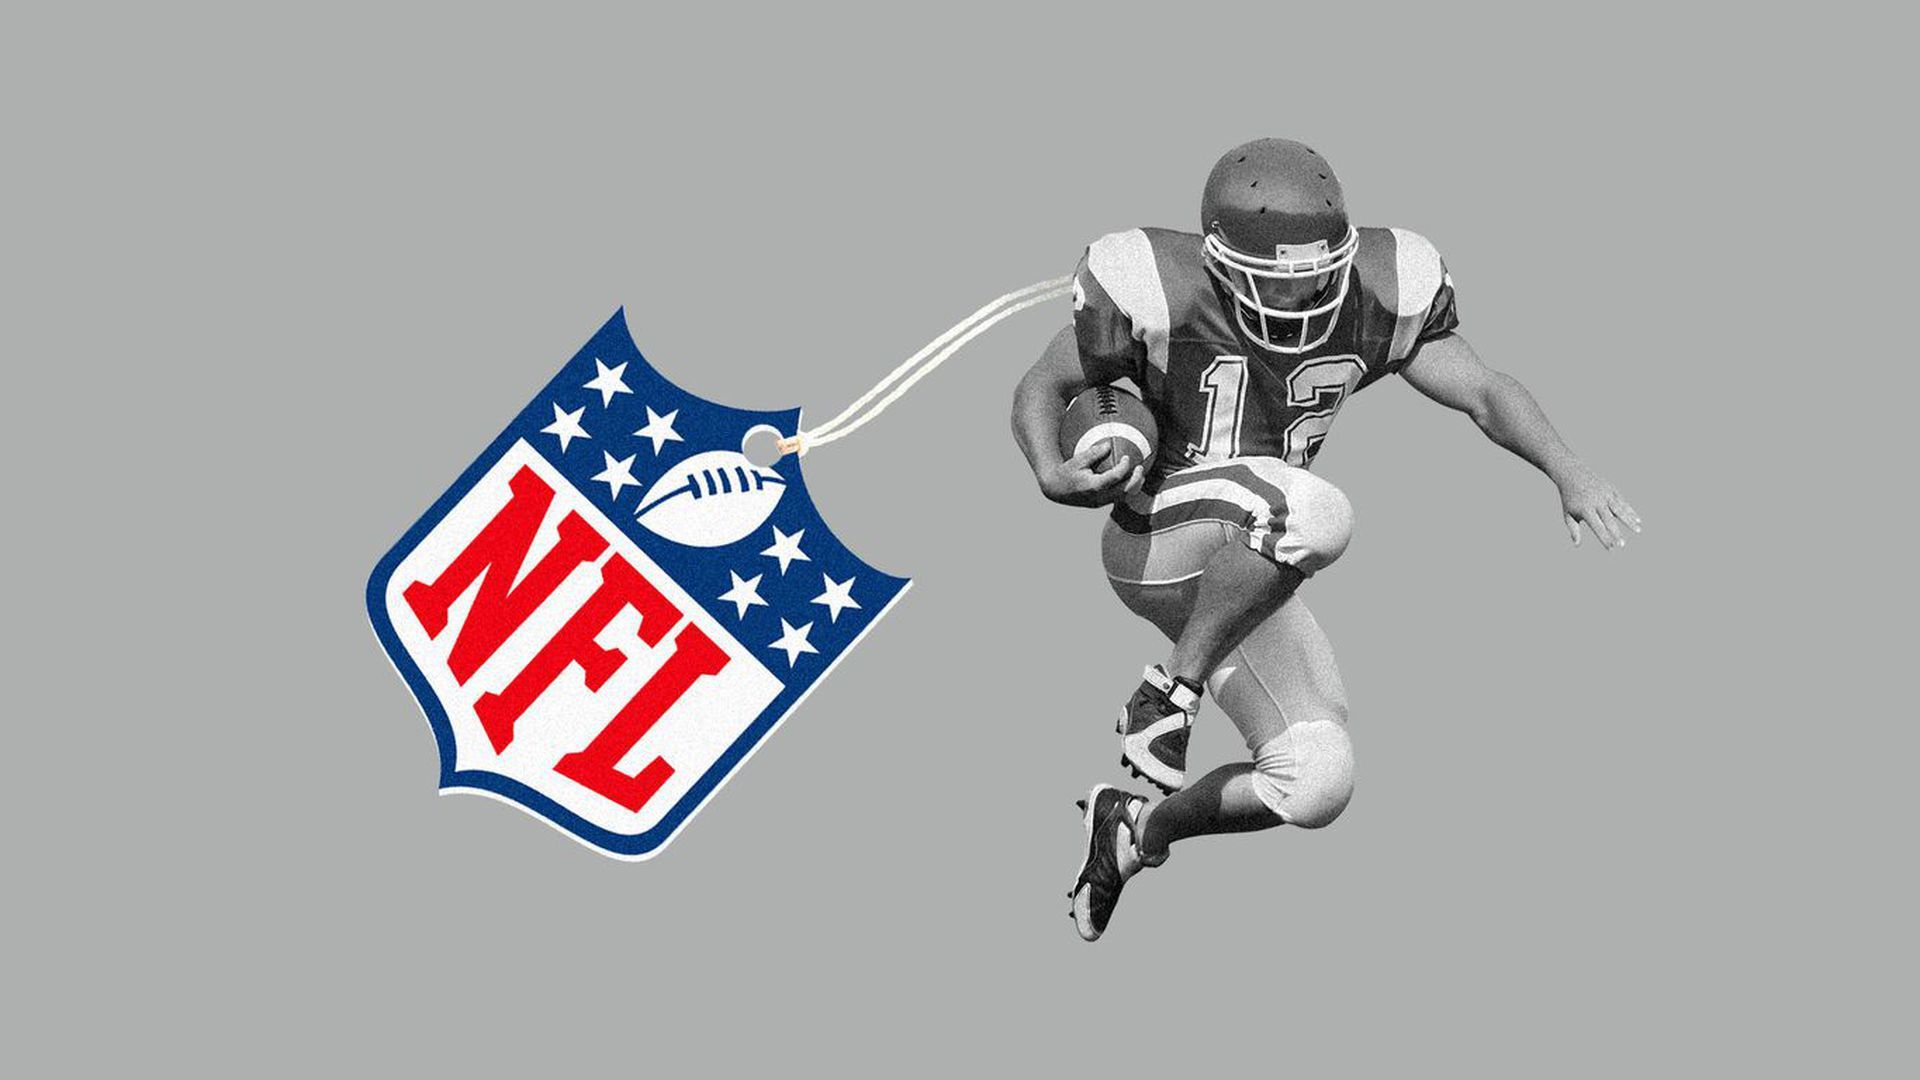 Illustration of a football player with an NFL tag